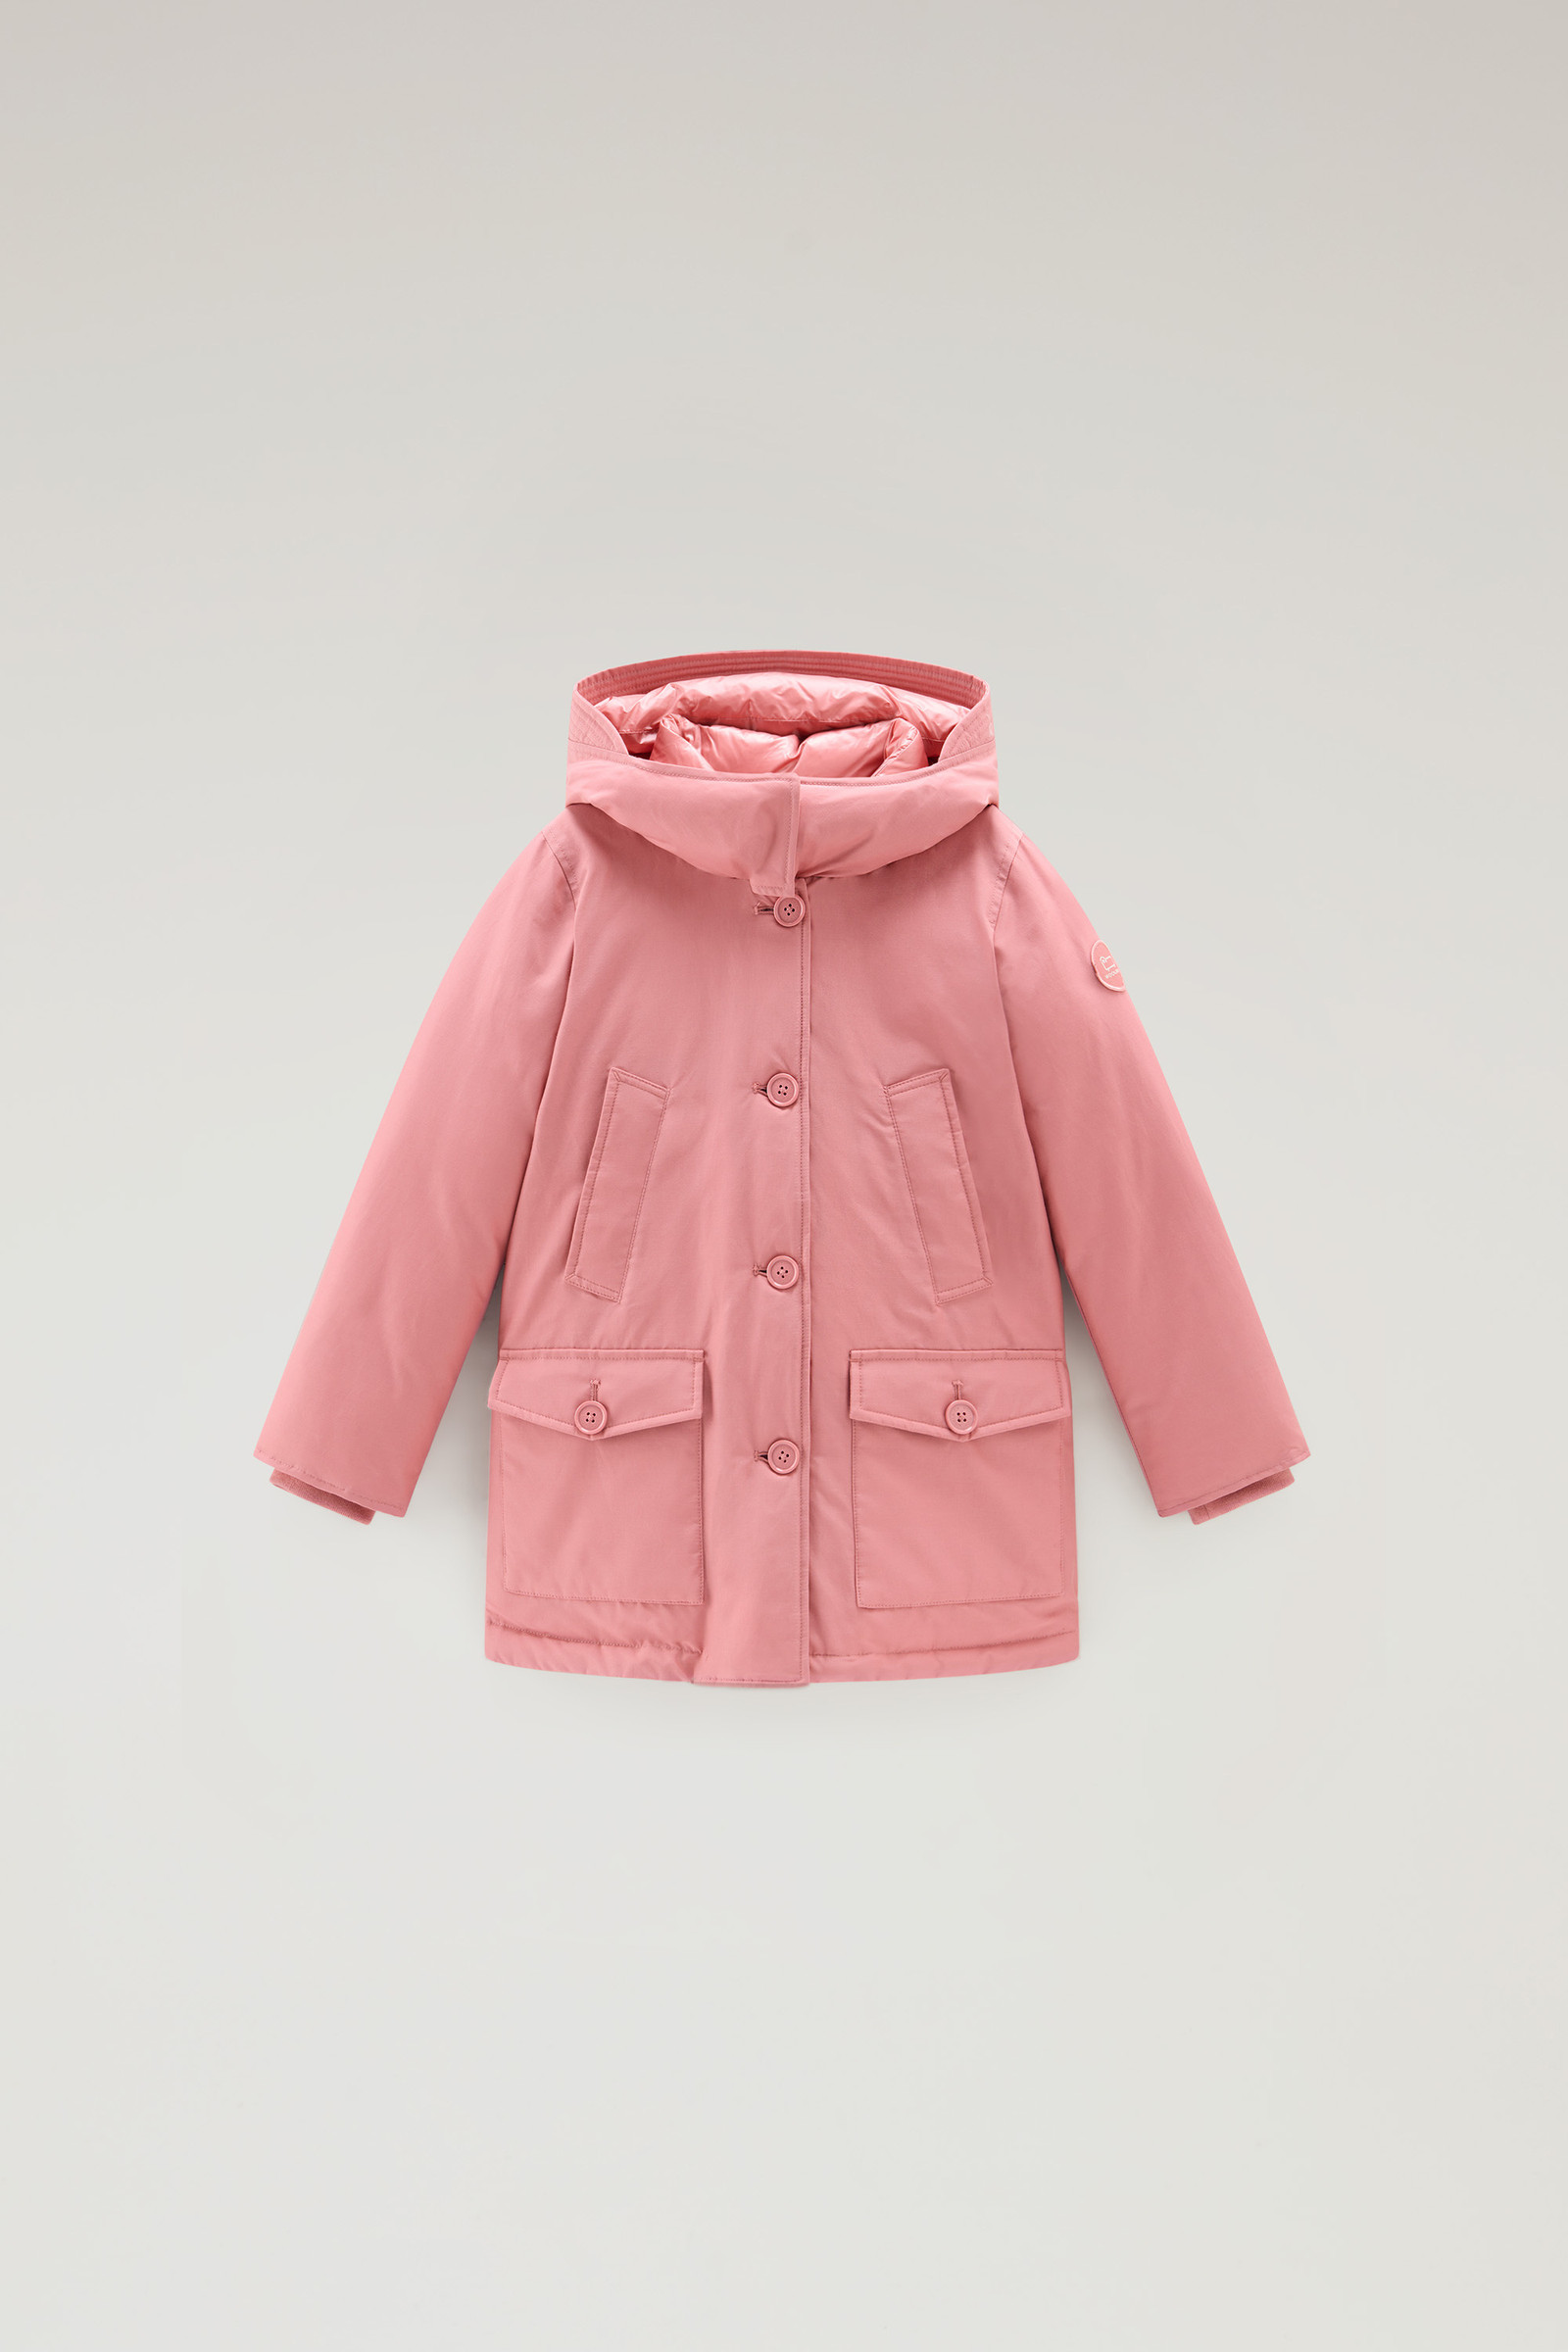 Girl\'s Arctic Parka in Ramar Woolrich Pink Satin with USA Details Cloth 